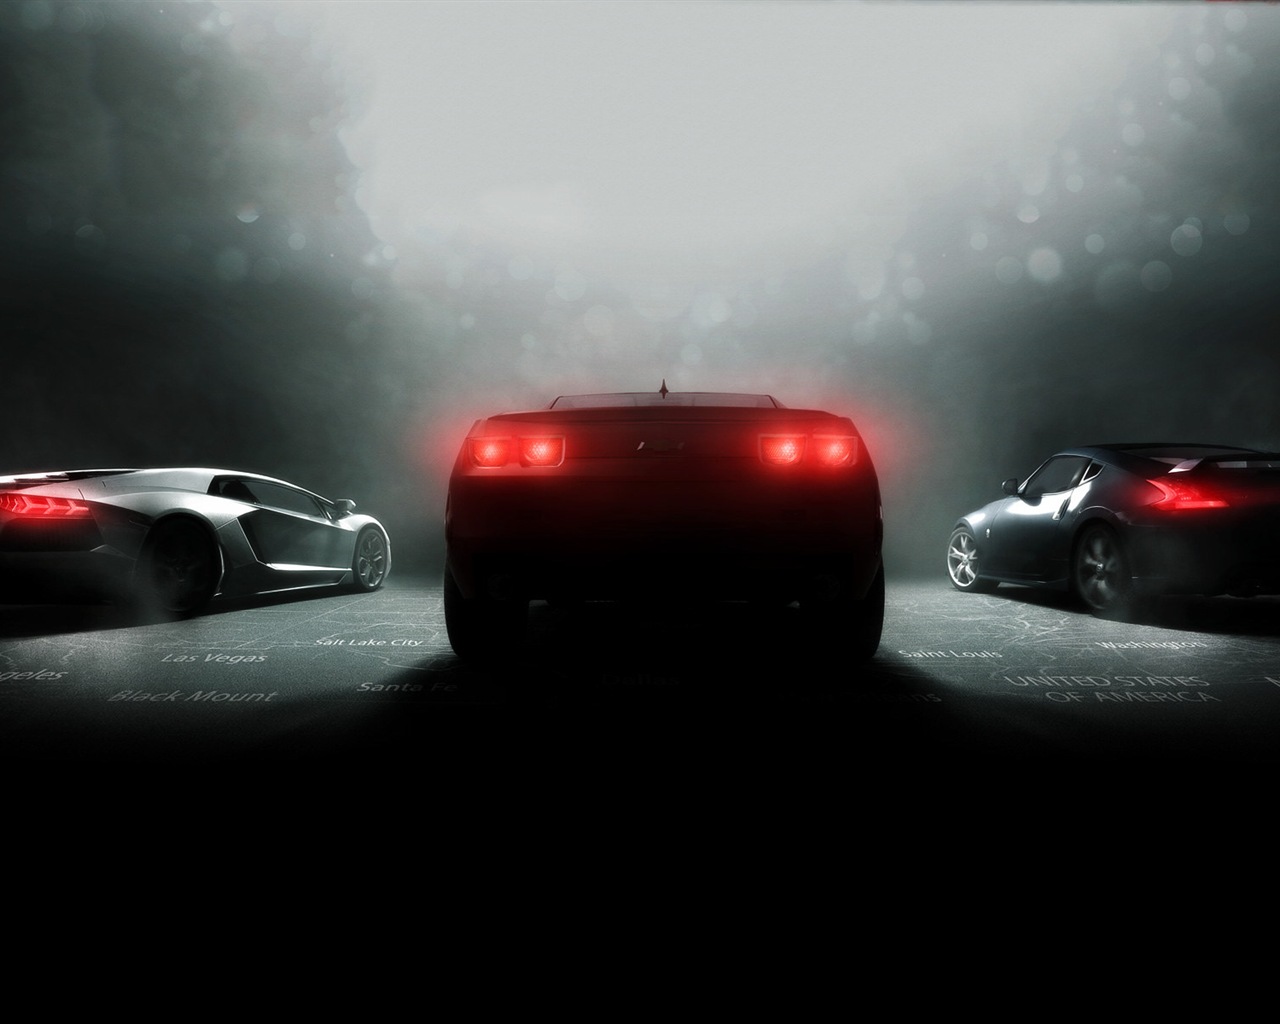 The Crew game HD wallpapers #3 - 1280x1024